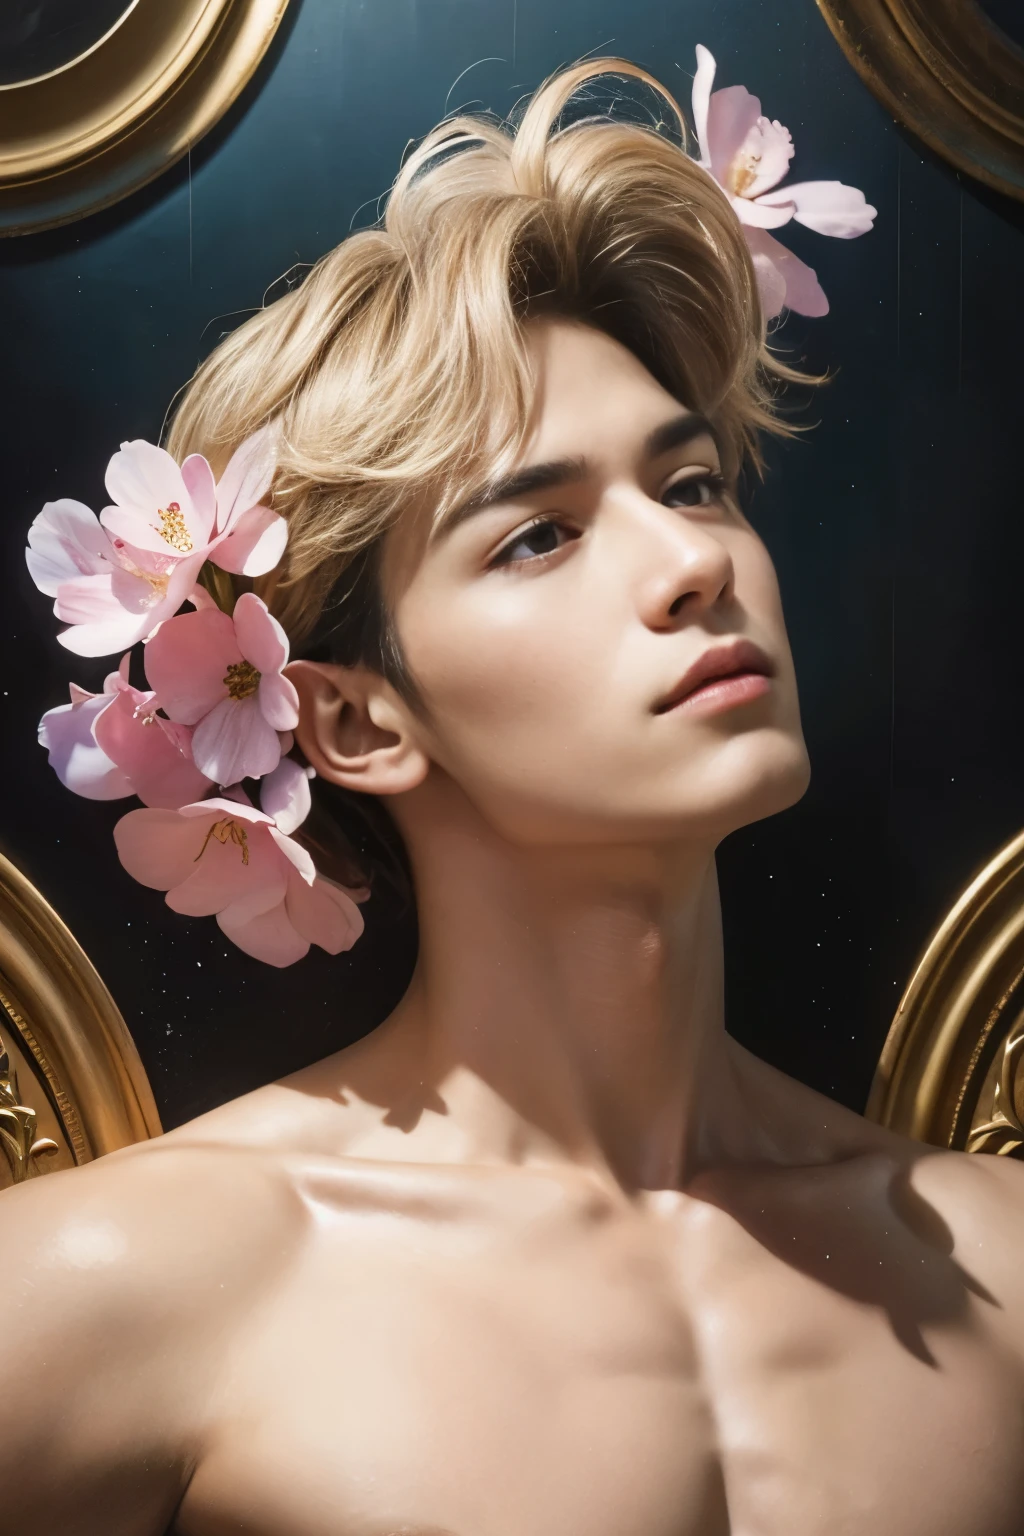 a muscular, 1 muscular man, solo, (oil painting:1.5), (NSFW:1.2), a muscular man wearing nothing completely naked, joyfully twirling in the raining paint, 1boy, short hair, floral, Lycianthus ,In light pink and light blue styles..., Dreamy and romantic composition..., dripping flowers on his face, in the style of collage-based, made of insects, william wegman, colorism, white background, pencil art illustrations, national geographic photo, luxurious, extravagant, stylish, , opulent, elegance, stunning beauty, professional, high contrast, detailed, Depict a dreamy, whimsical scene with elements that seem to merge with the background,